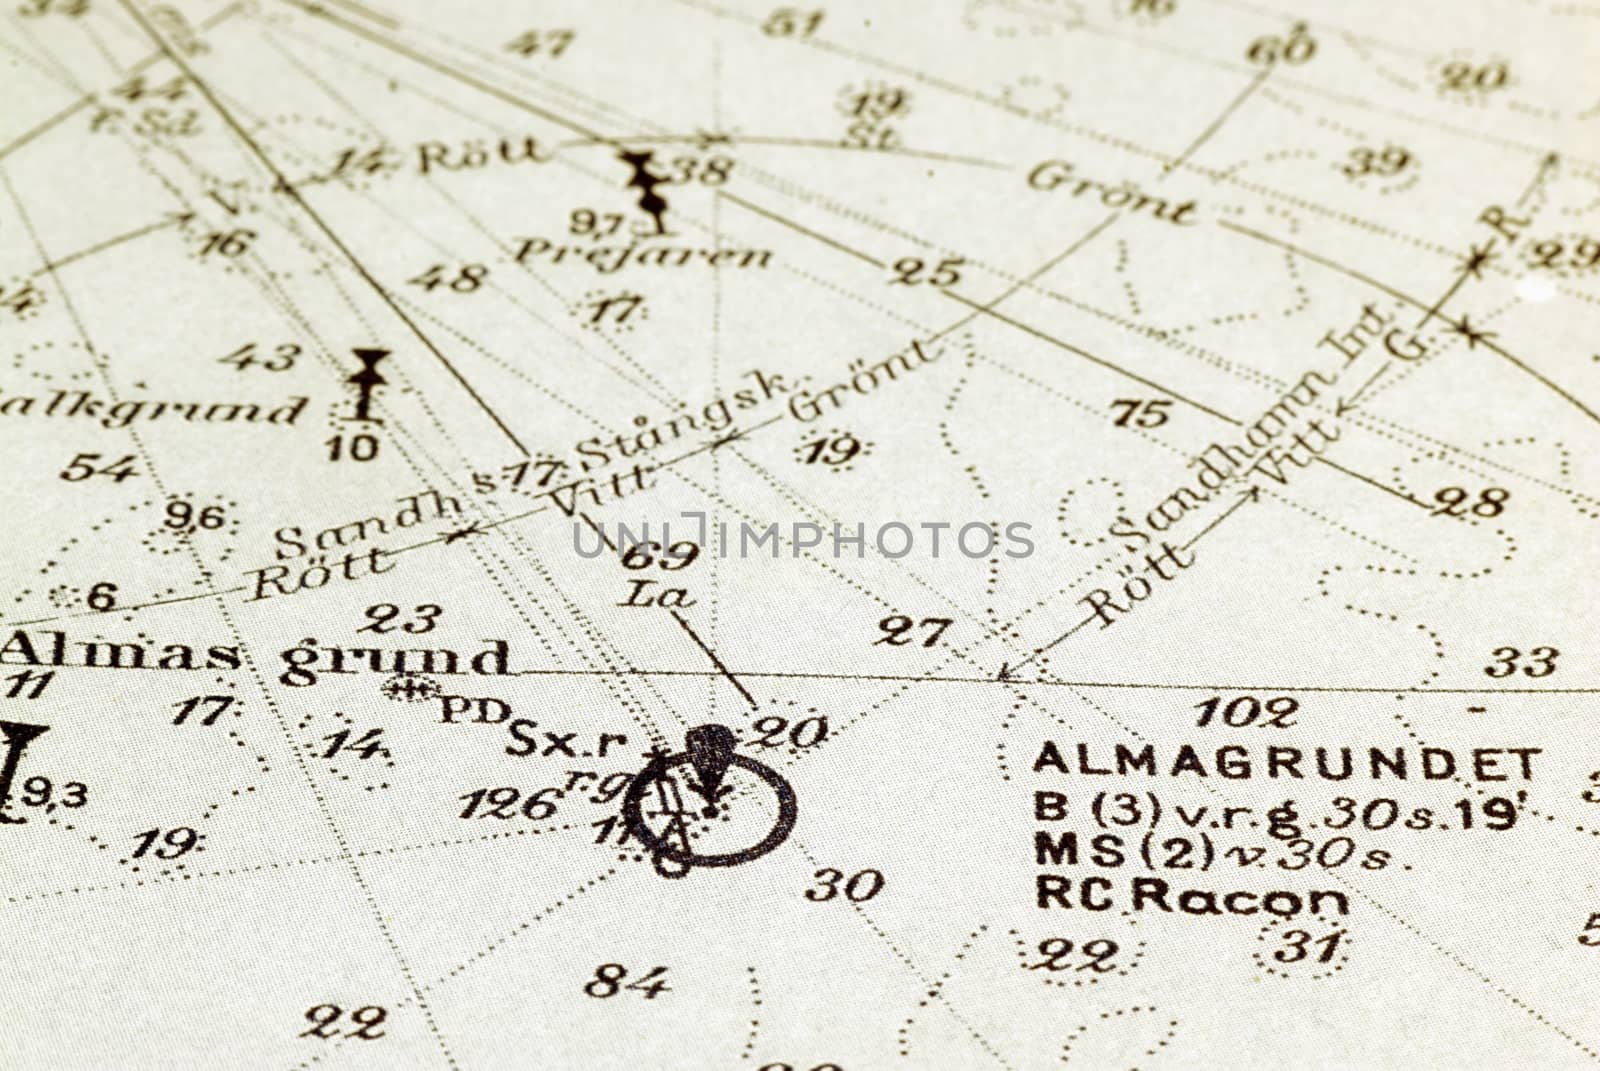 Macro shot of a very old marine chart, detailing Stockholm archipelago with the ground "Almagrundet" in focus.